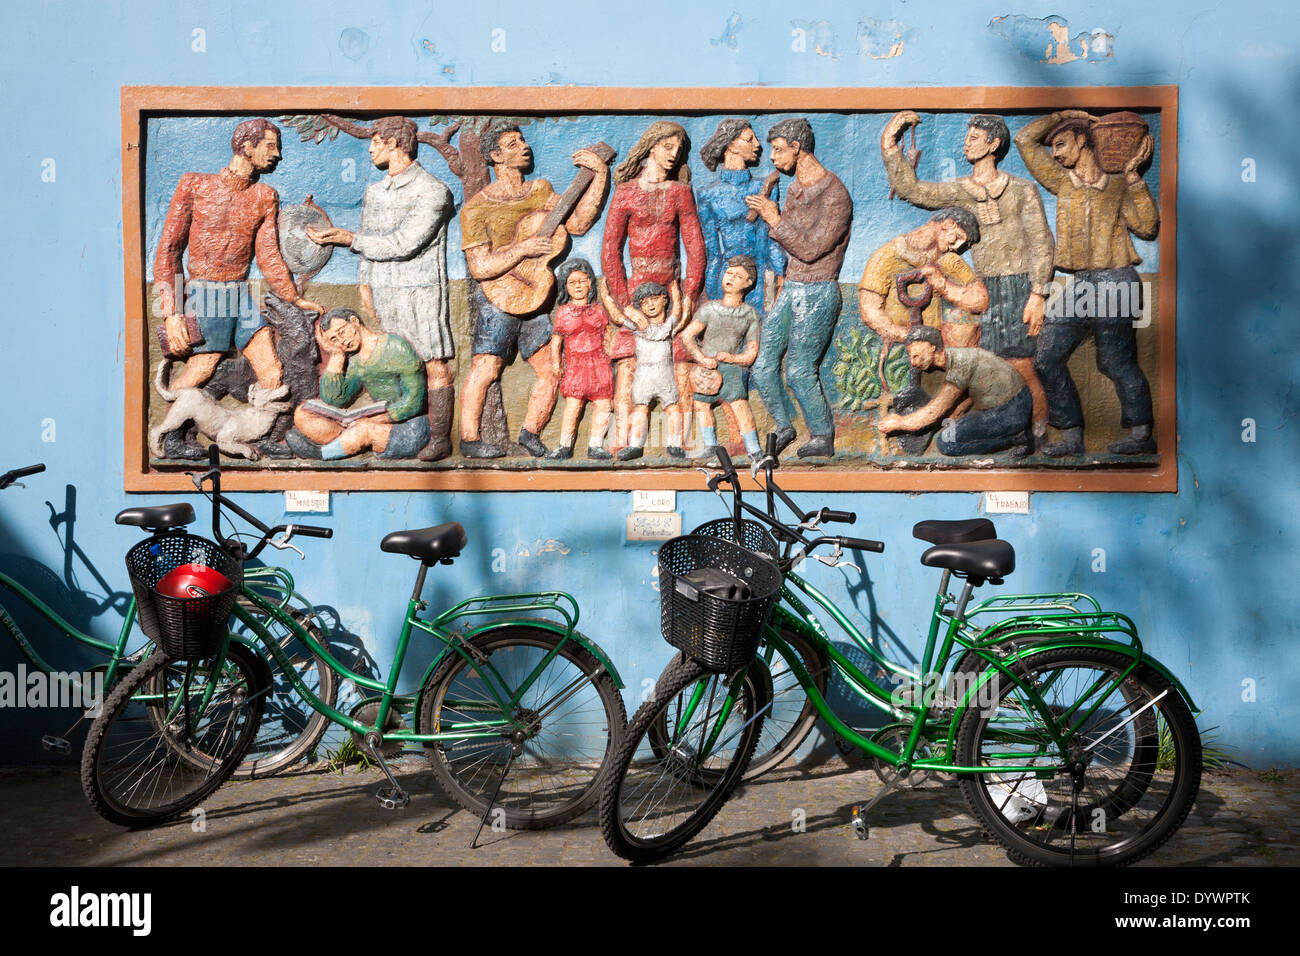 Bicycles and mural sculpture. Caminito street. La Boca district. Buenos Aires. Argentina Stock Photo